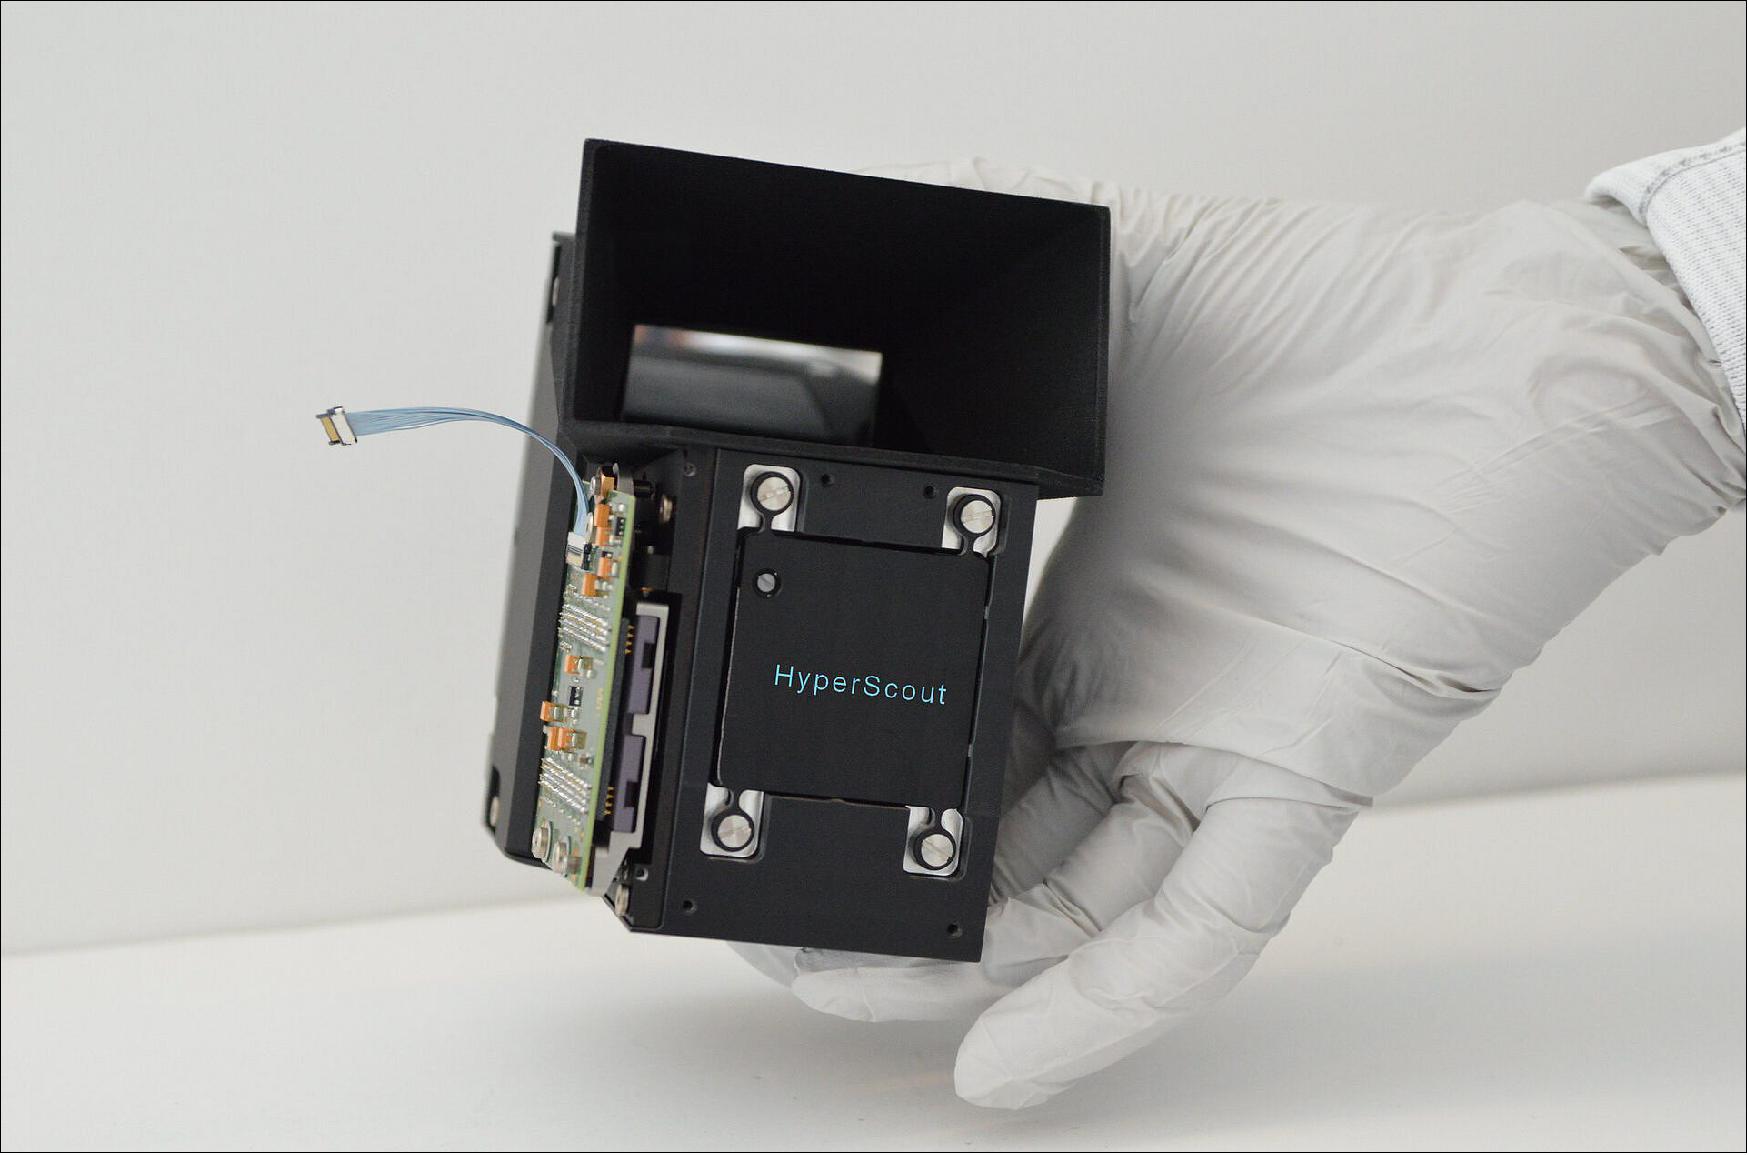 Figure 8: Observing in 45 visible and near-infrared spectral bands, the HyperScout hyperspectral imager was launched on 2 February 2018, aboard ESA’s cereal box-sized GomX-4B nanosatellite. HyperScout has been developed by cosine Research in the Netherlands (image credit: cosine Research)